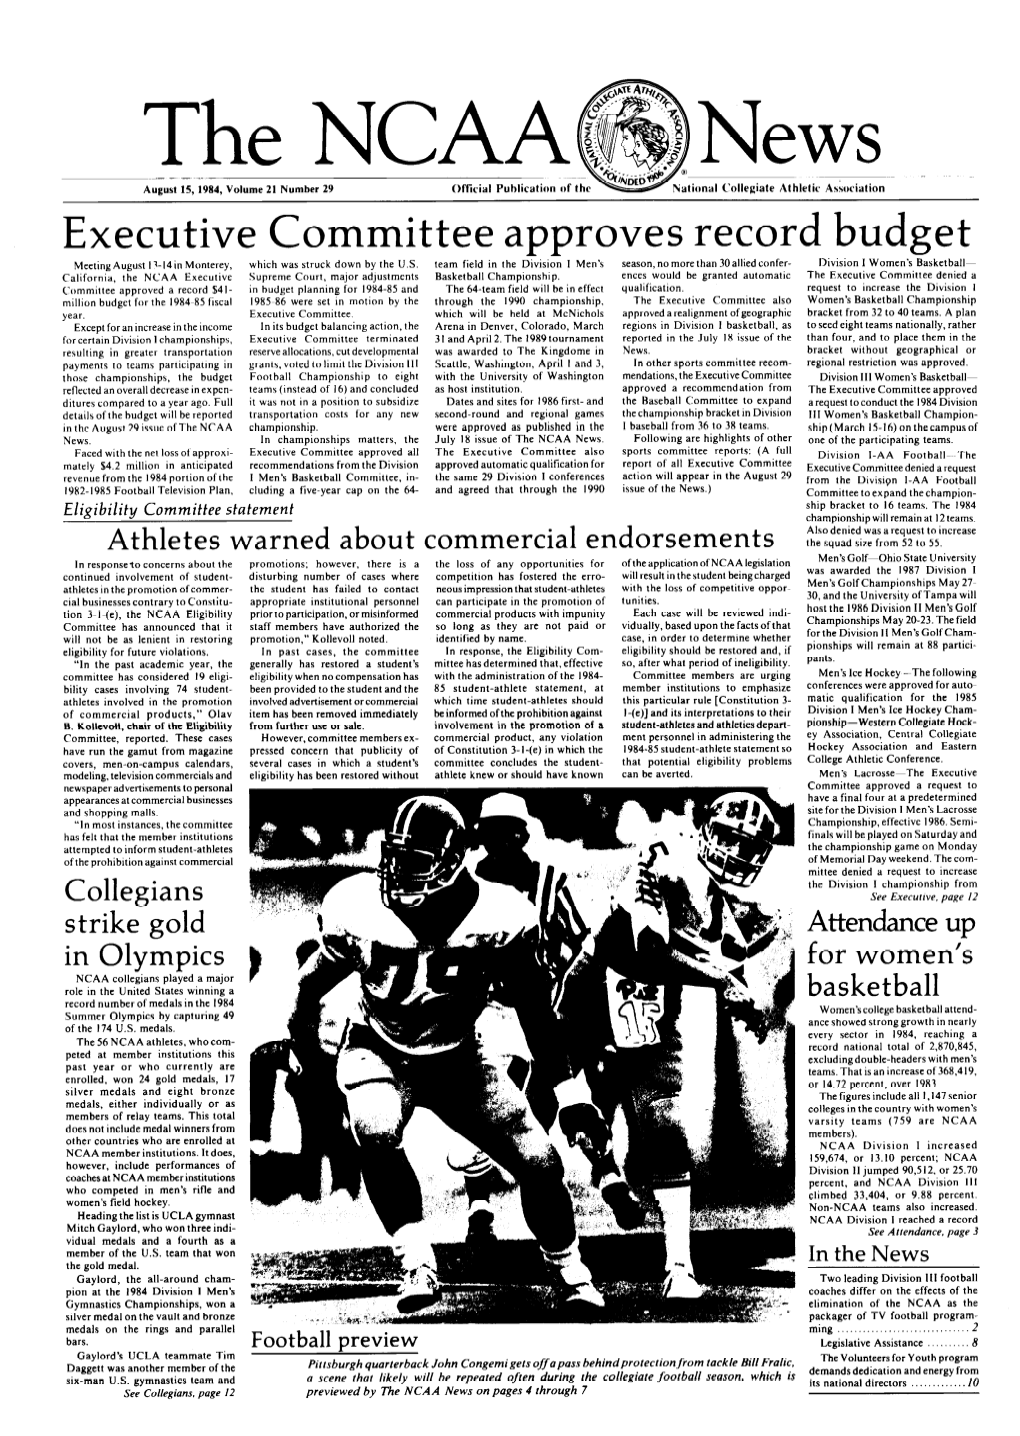 August 15, 1984 Rthe NCAA Footbd Preview Division I-A Features Competitive Balance by Mlchacl V